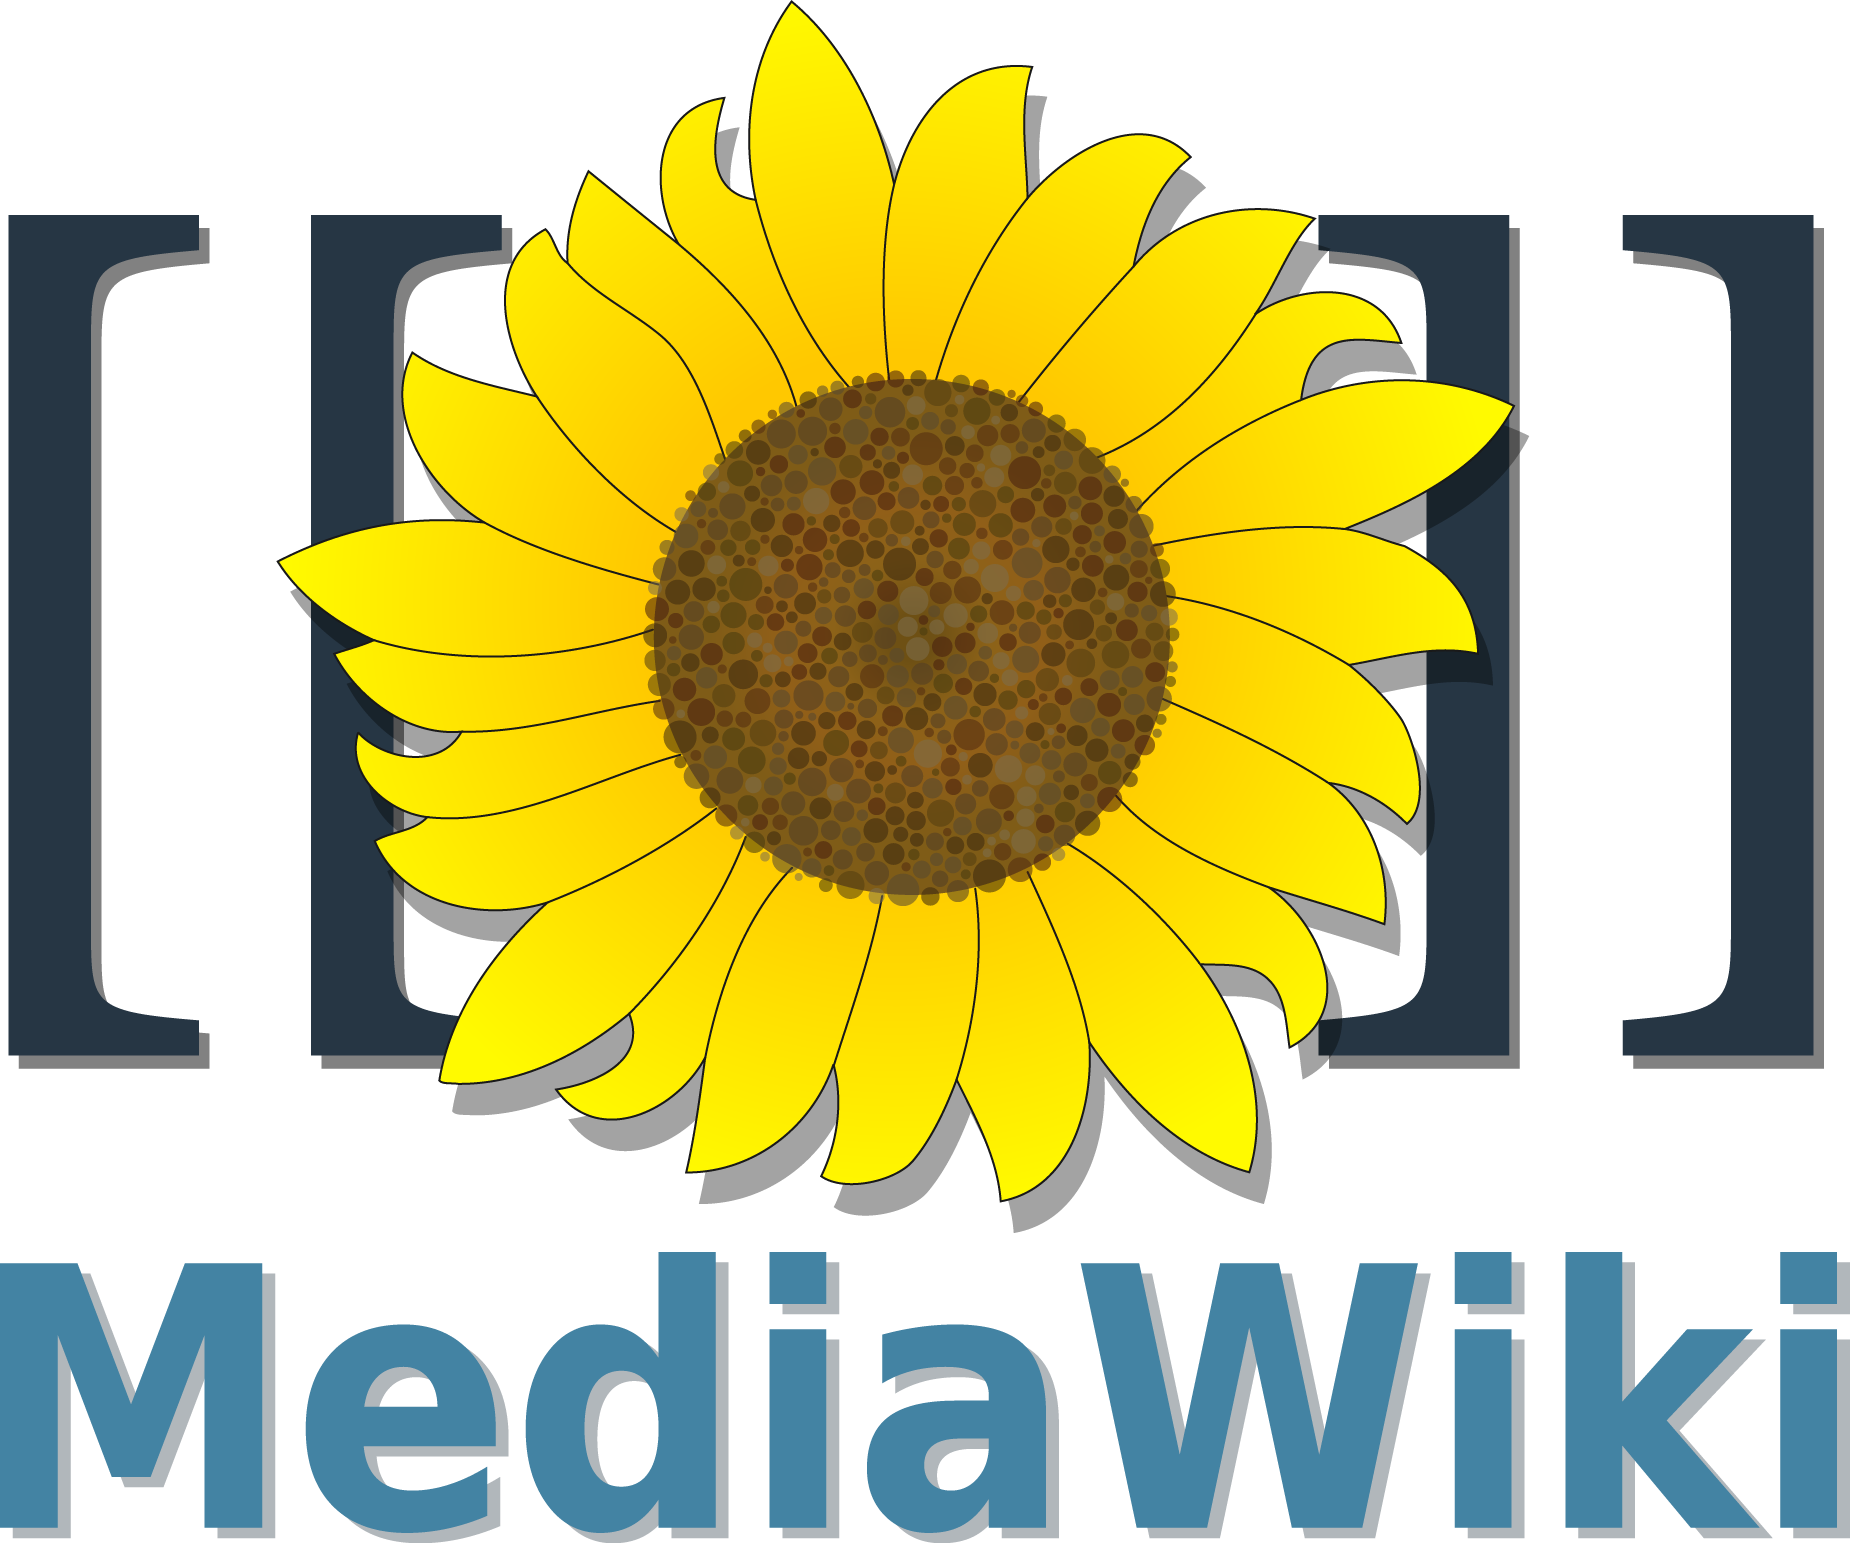 Time to upgrade Mediawikis again!